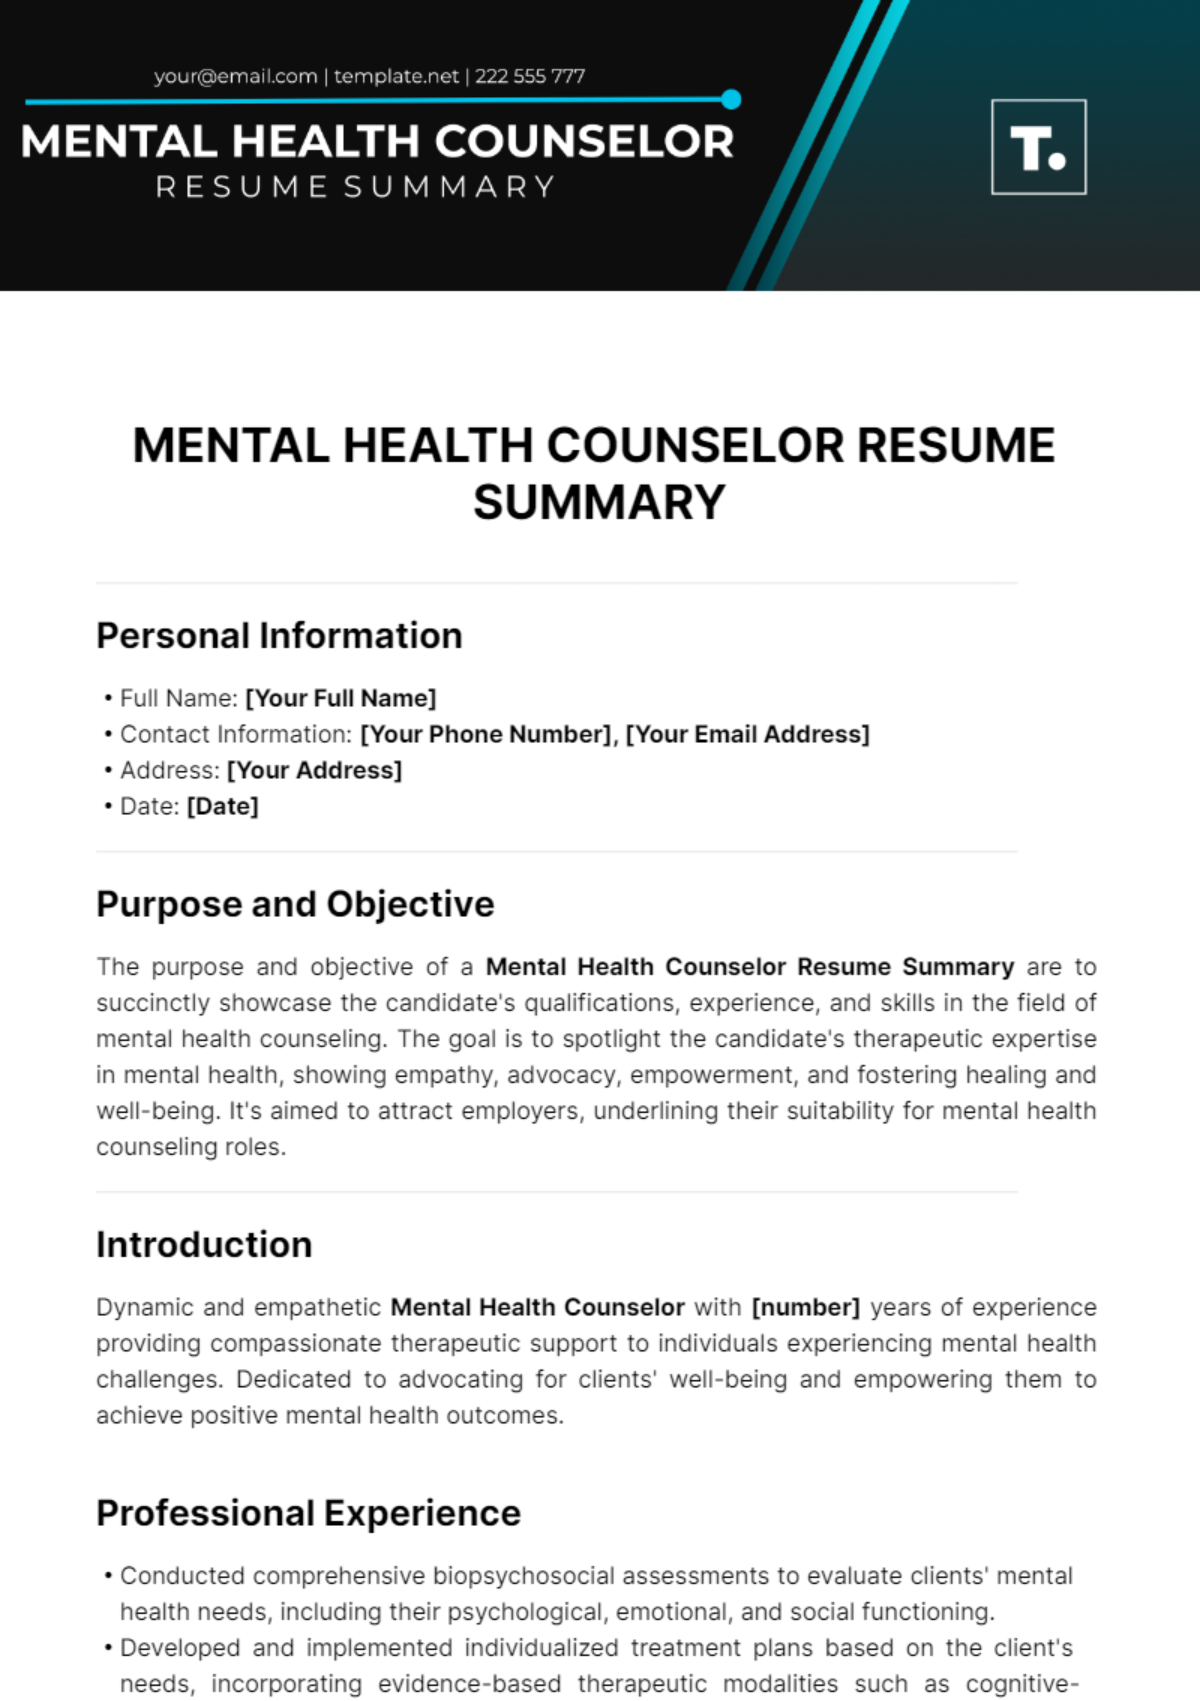 Free Mental Health Counselor Resume Summary Template